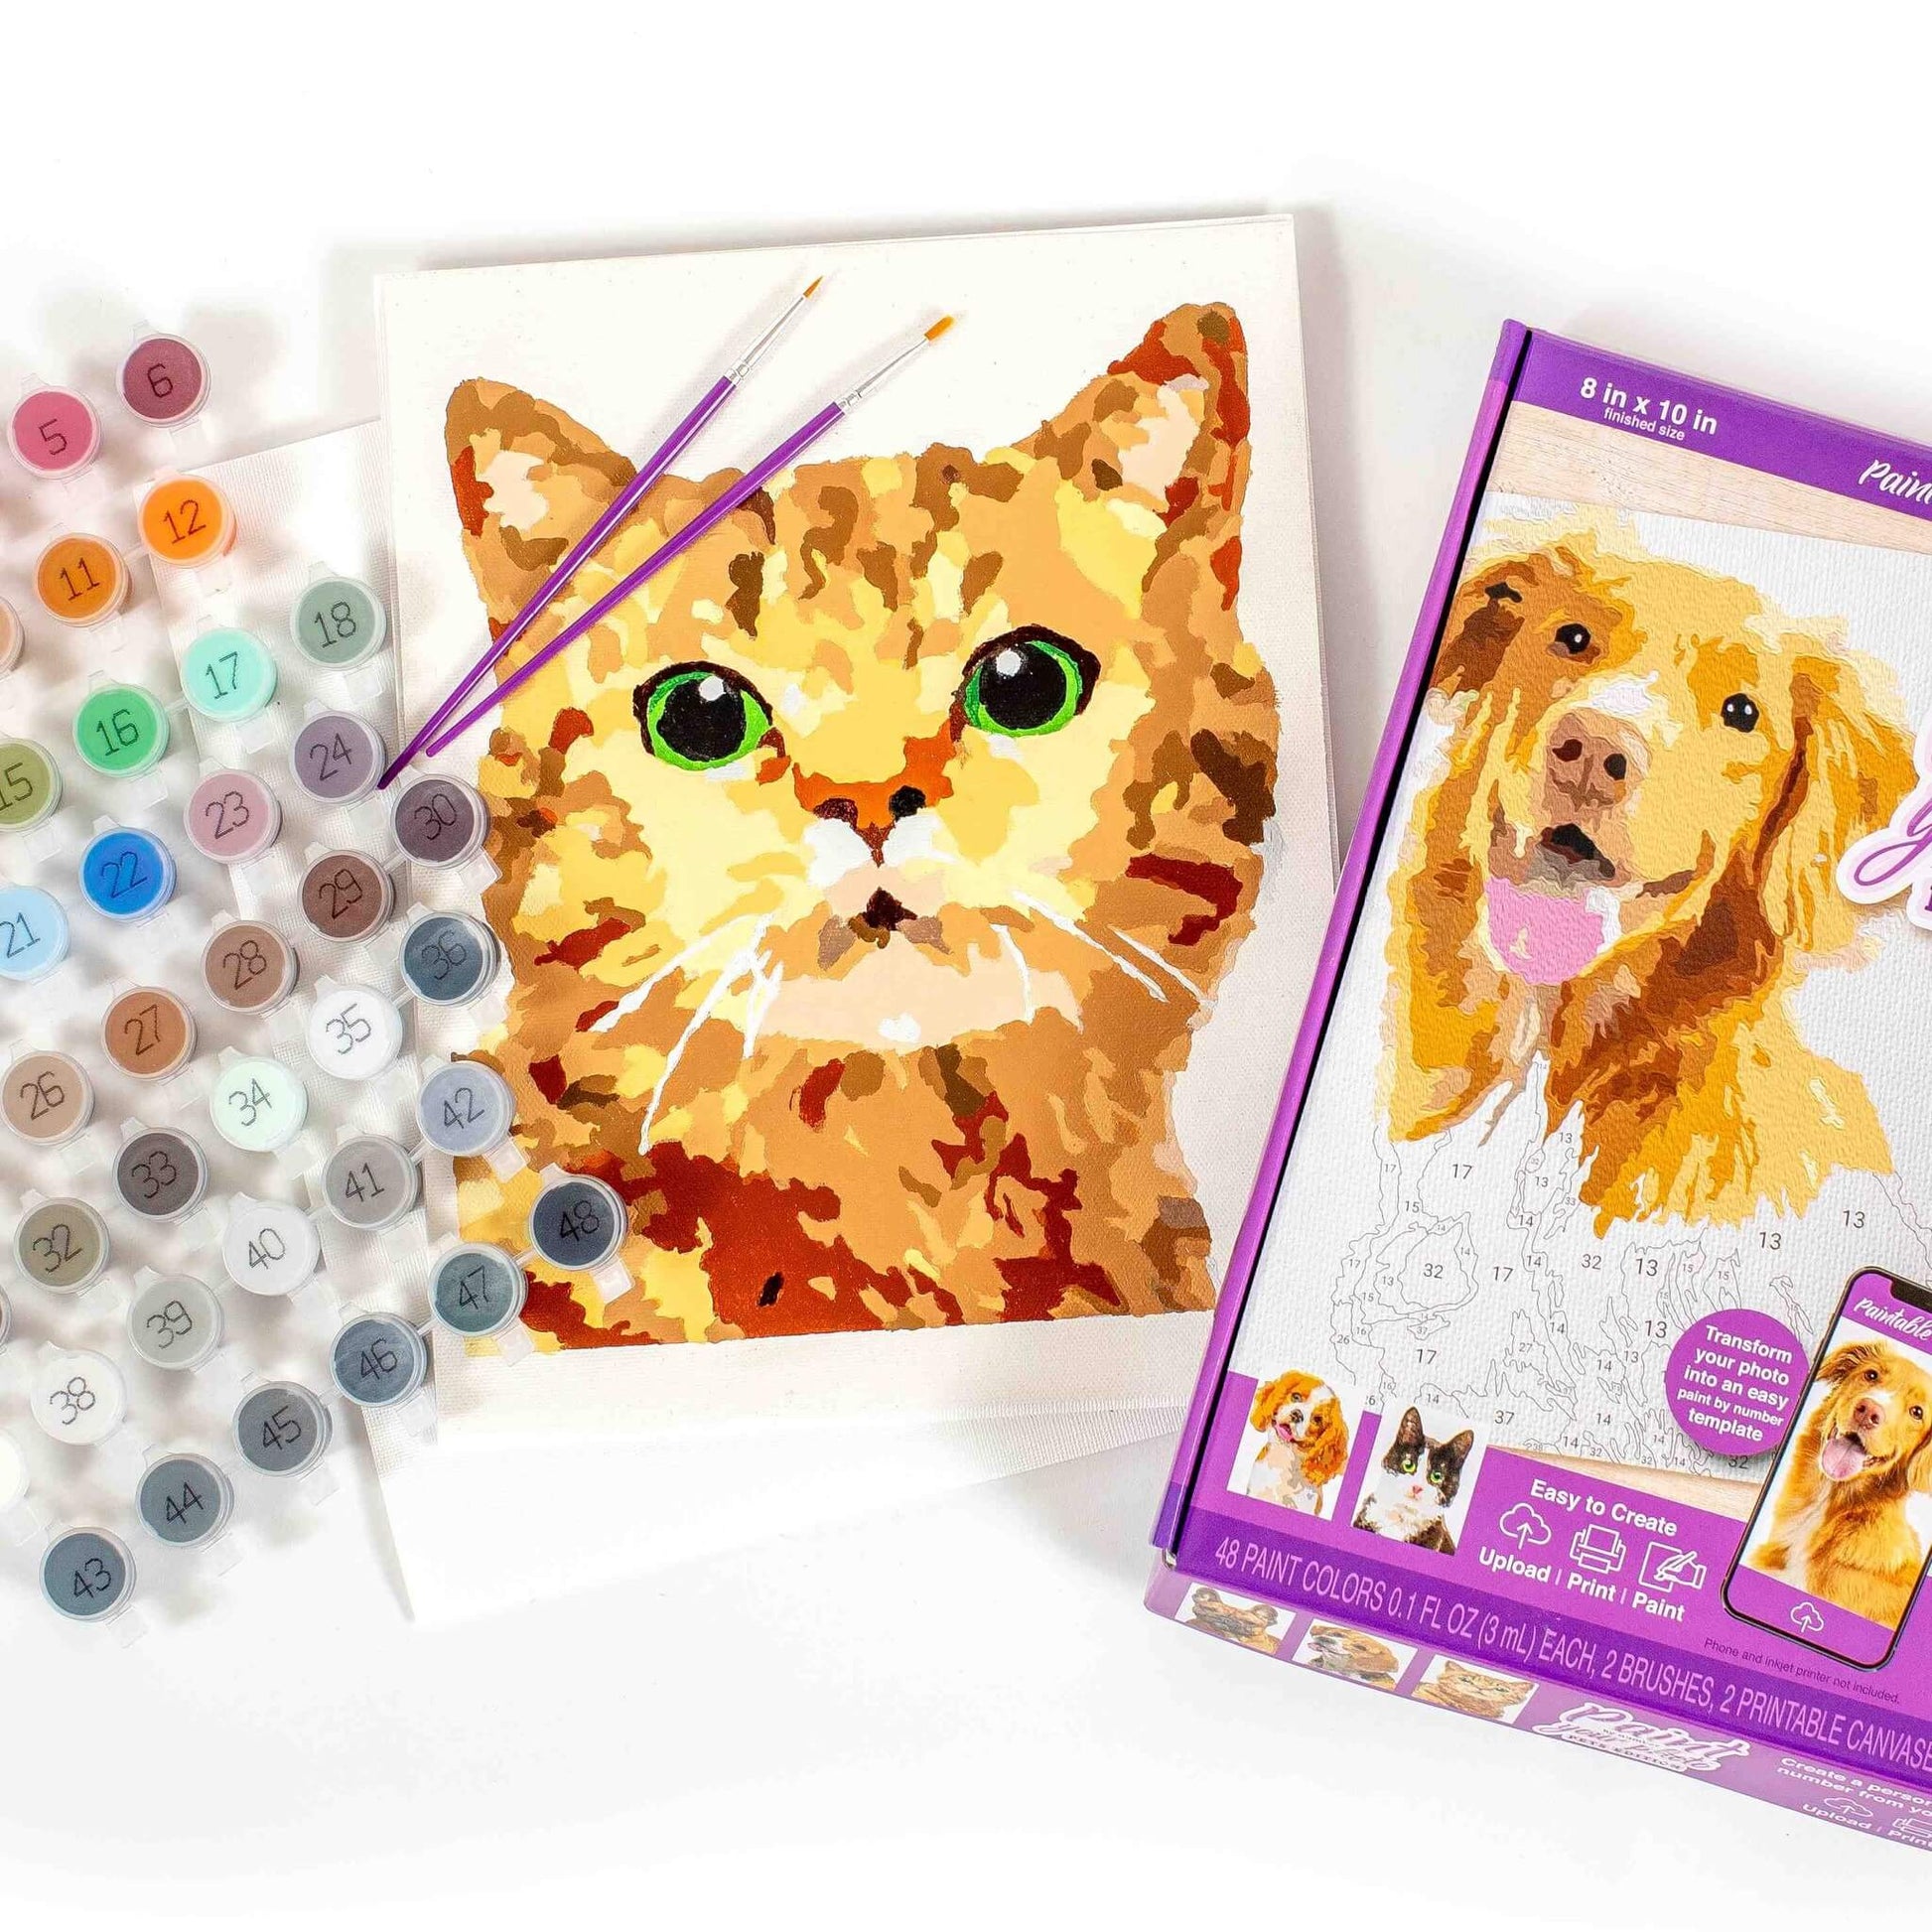 A completed paint-by-number canvas showcasing a vividly colored orange cat with striking green eyes. Beside it, an array of numbered paint pots and two purple brushes. To the right, a product box displays a paint-by-number dog, showing a kit with 48 paint colors and brushes included.